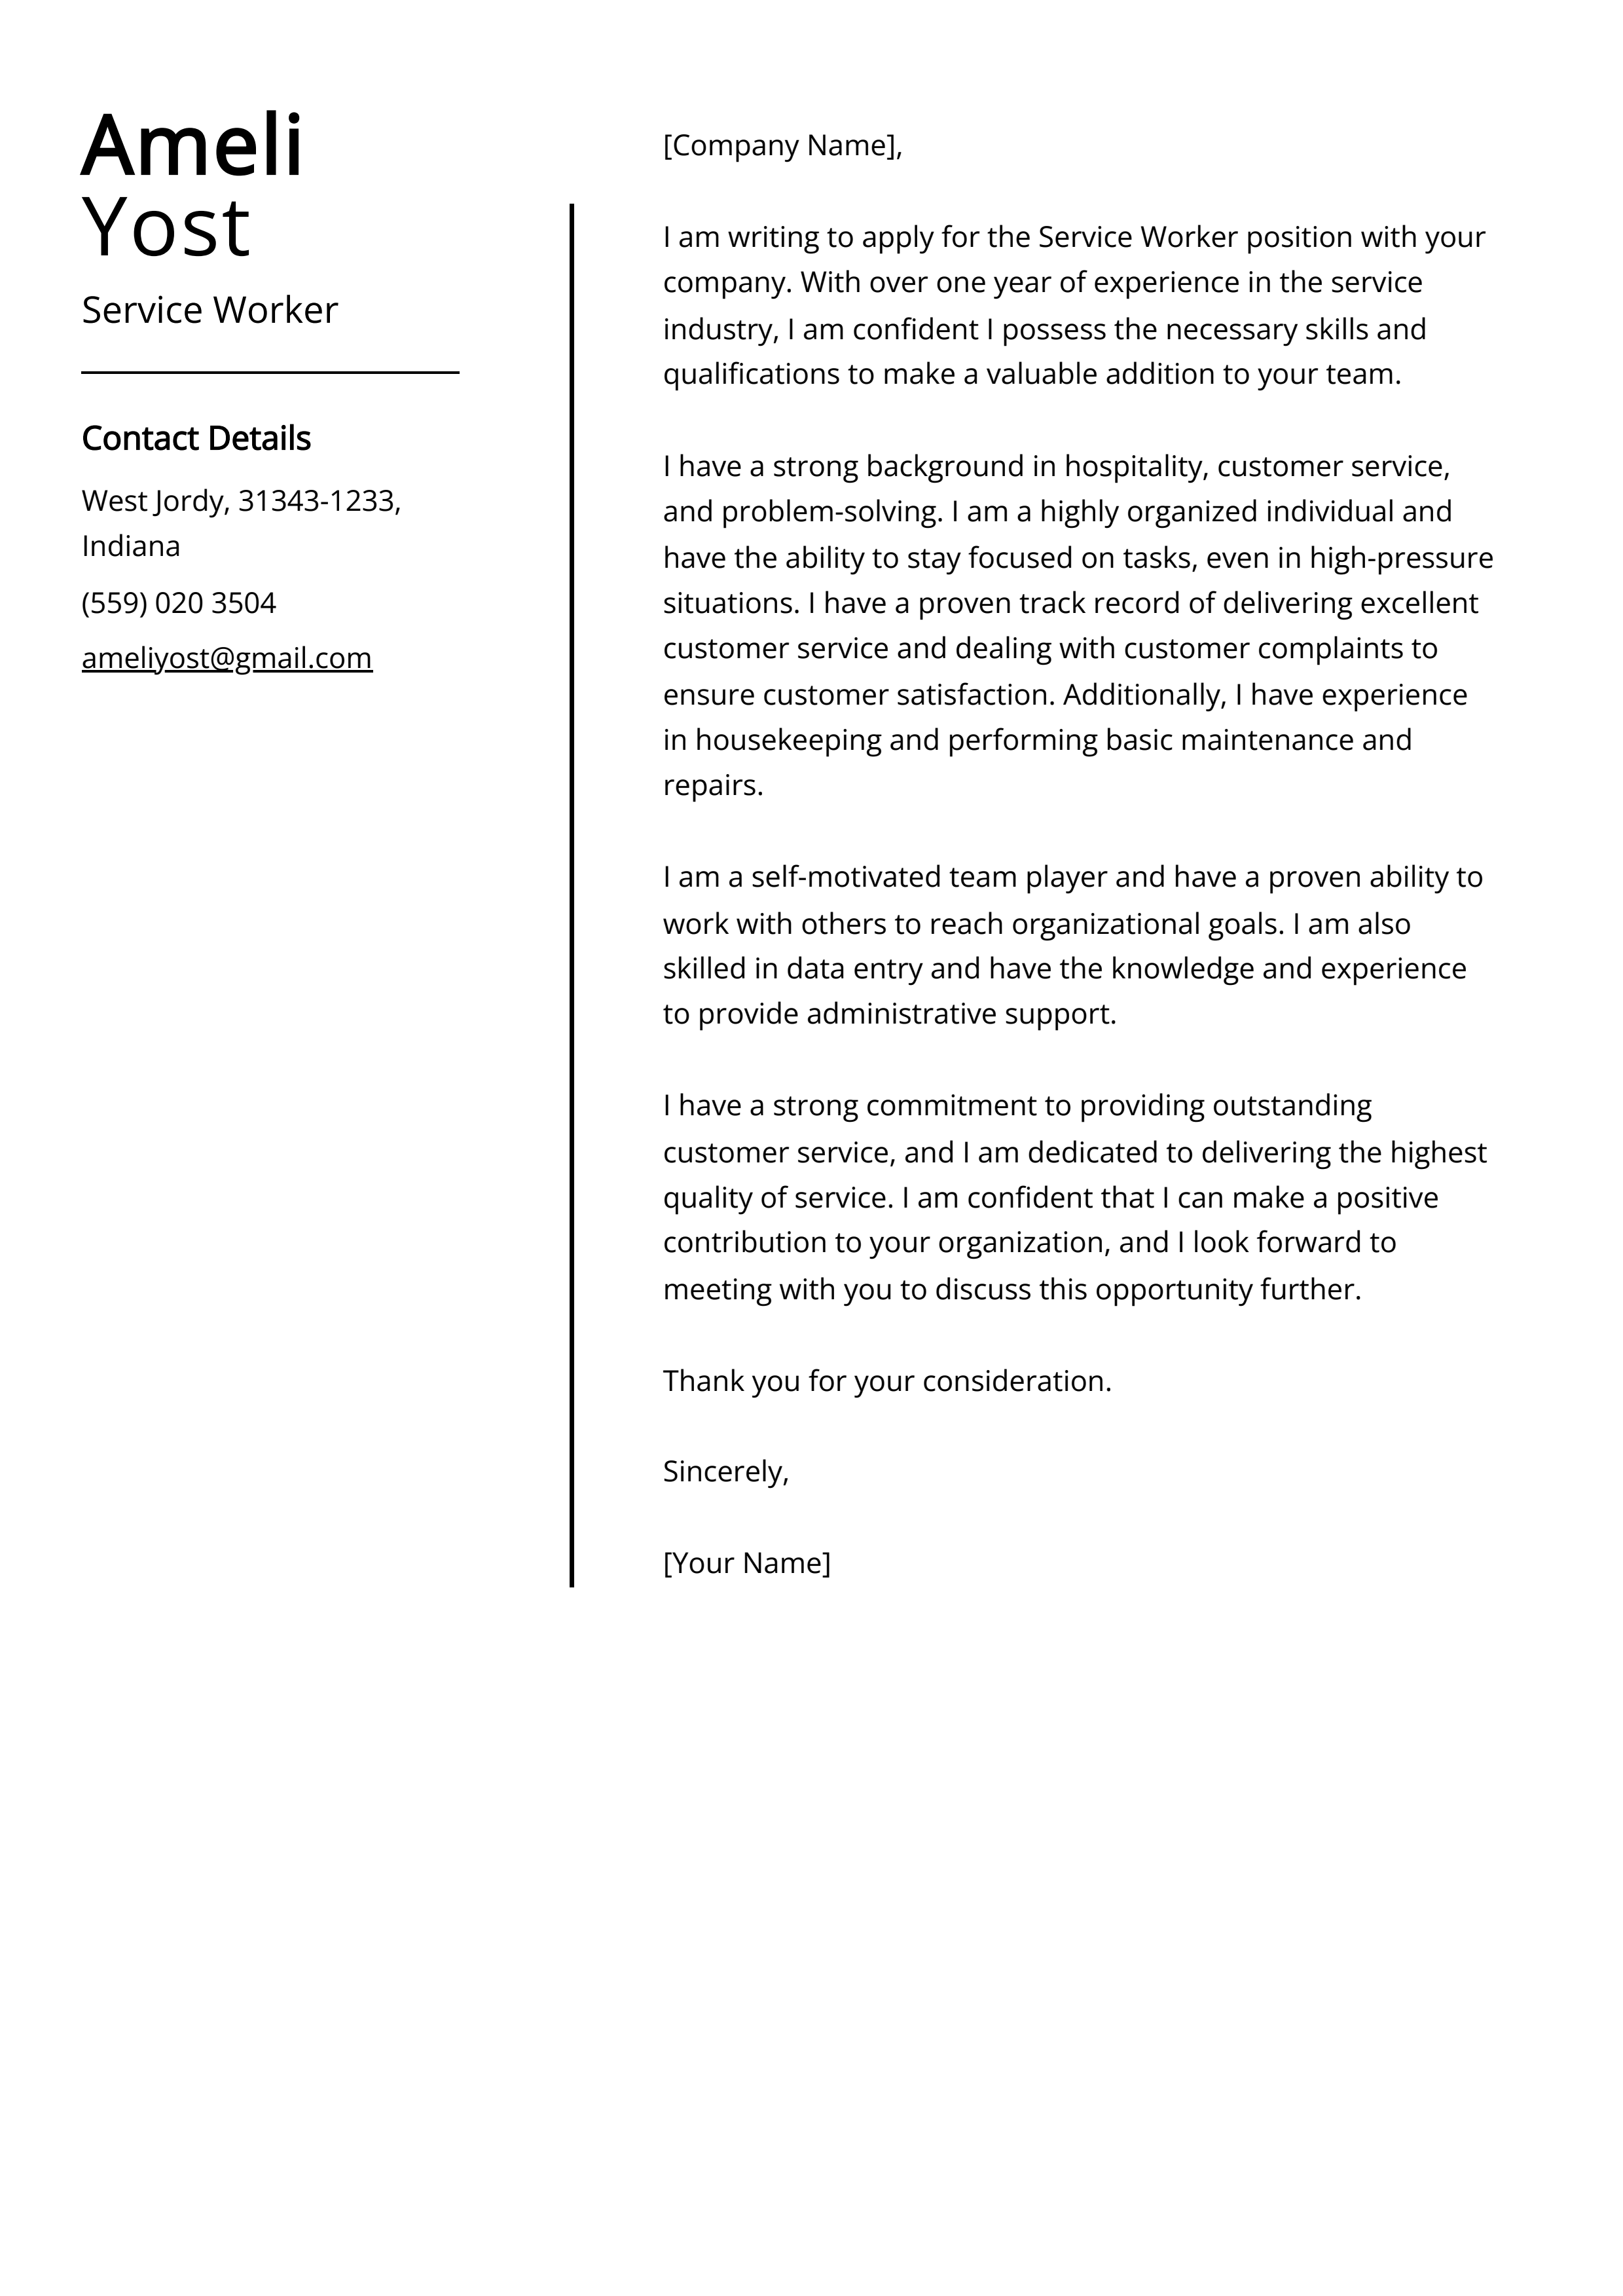 national careers service cover letter